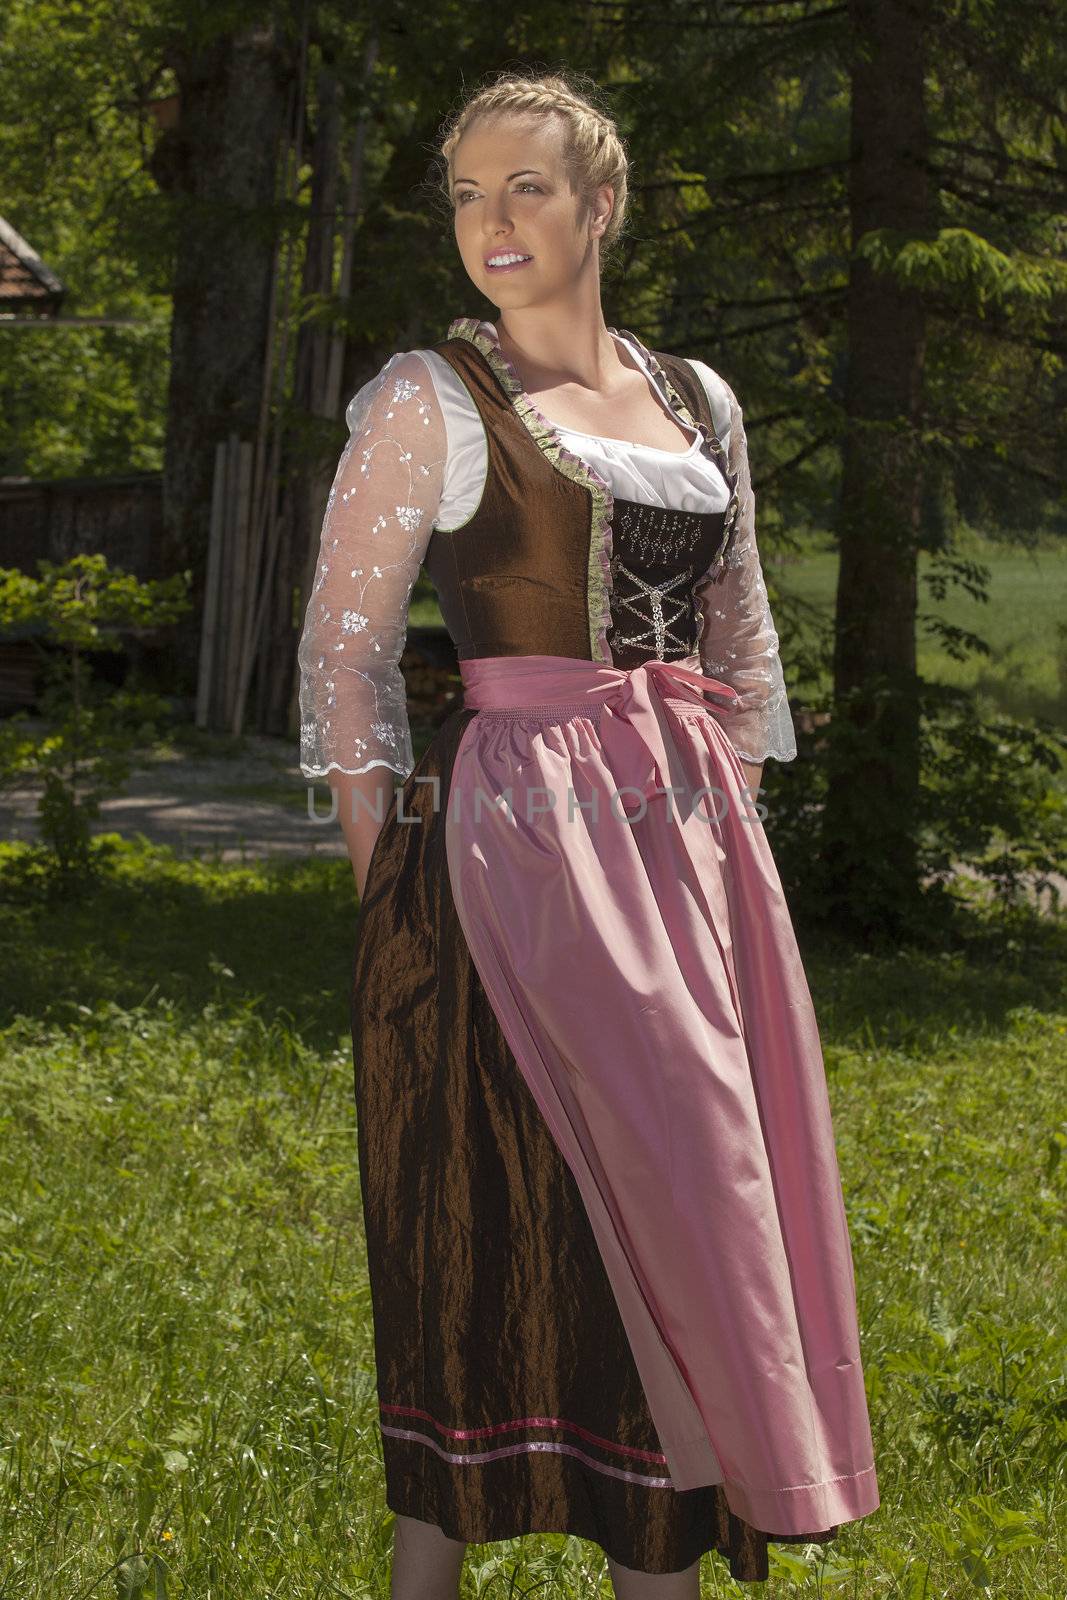 Fashion in Bavaria by STphotography